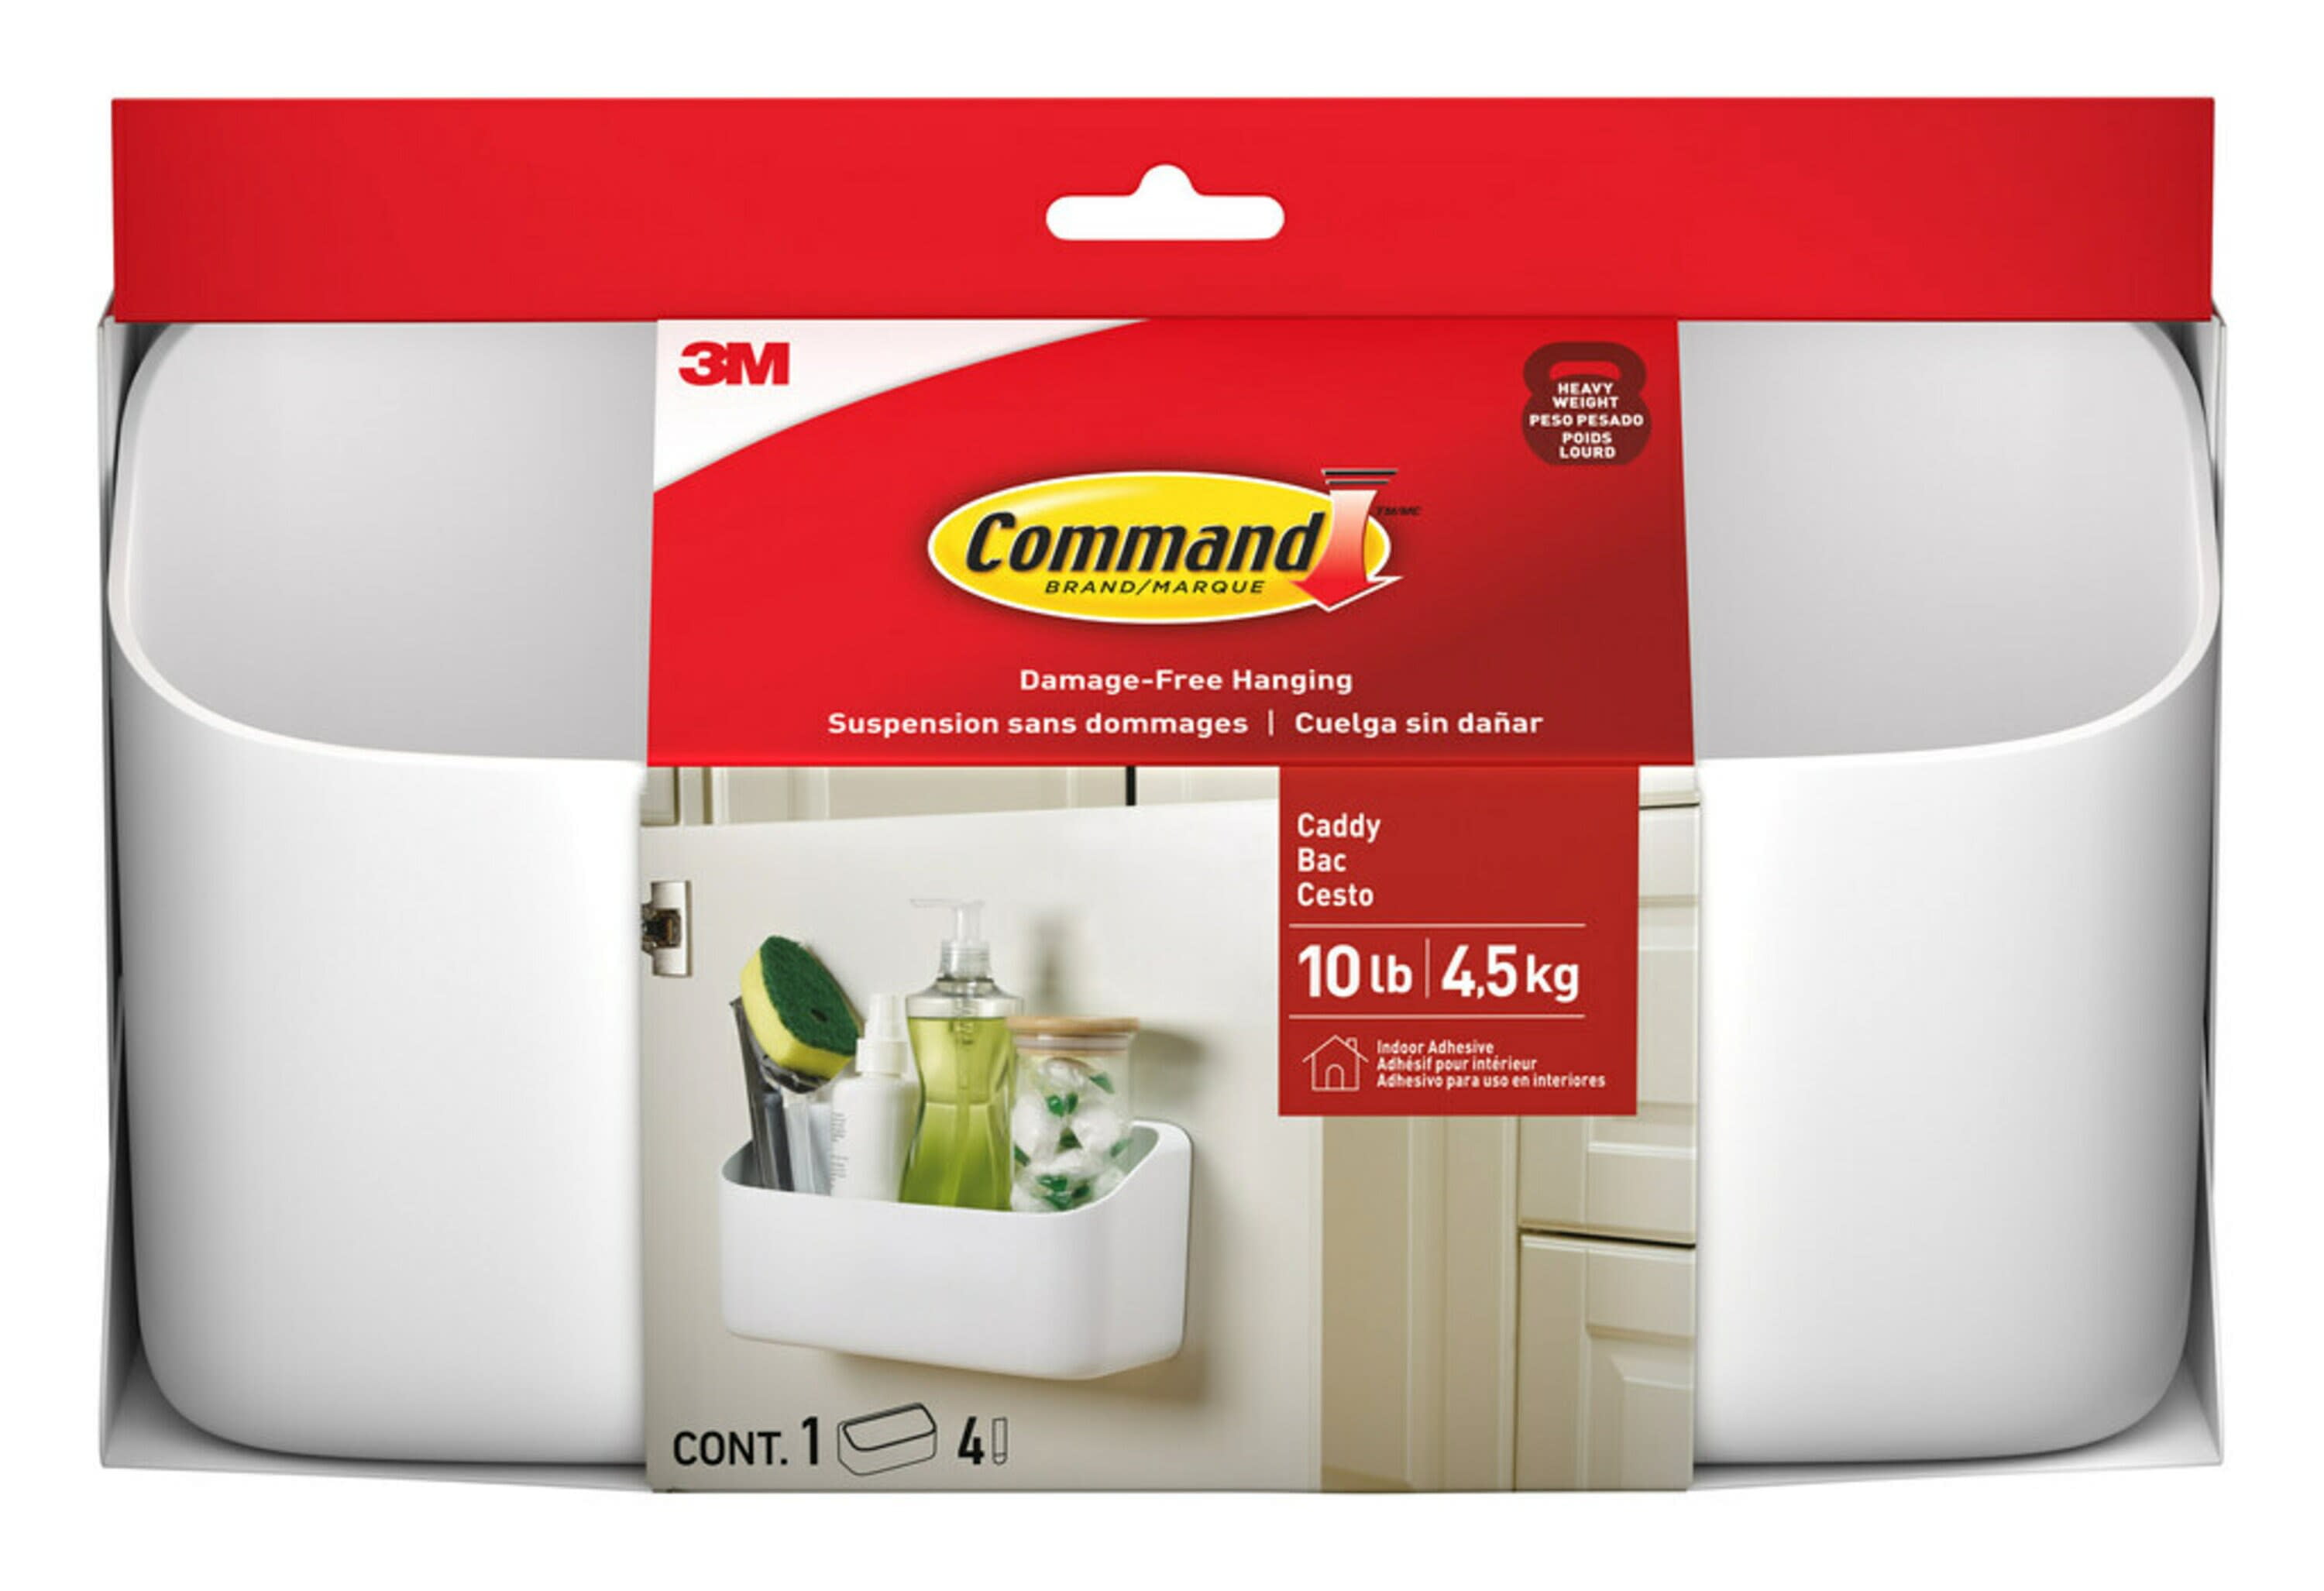 Command Large Caddy, Hangs up to 10lbs, White, Bathtub & Shower Organizer, 1 Caddy